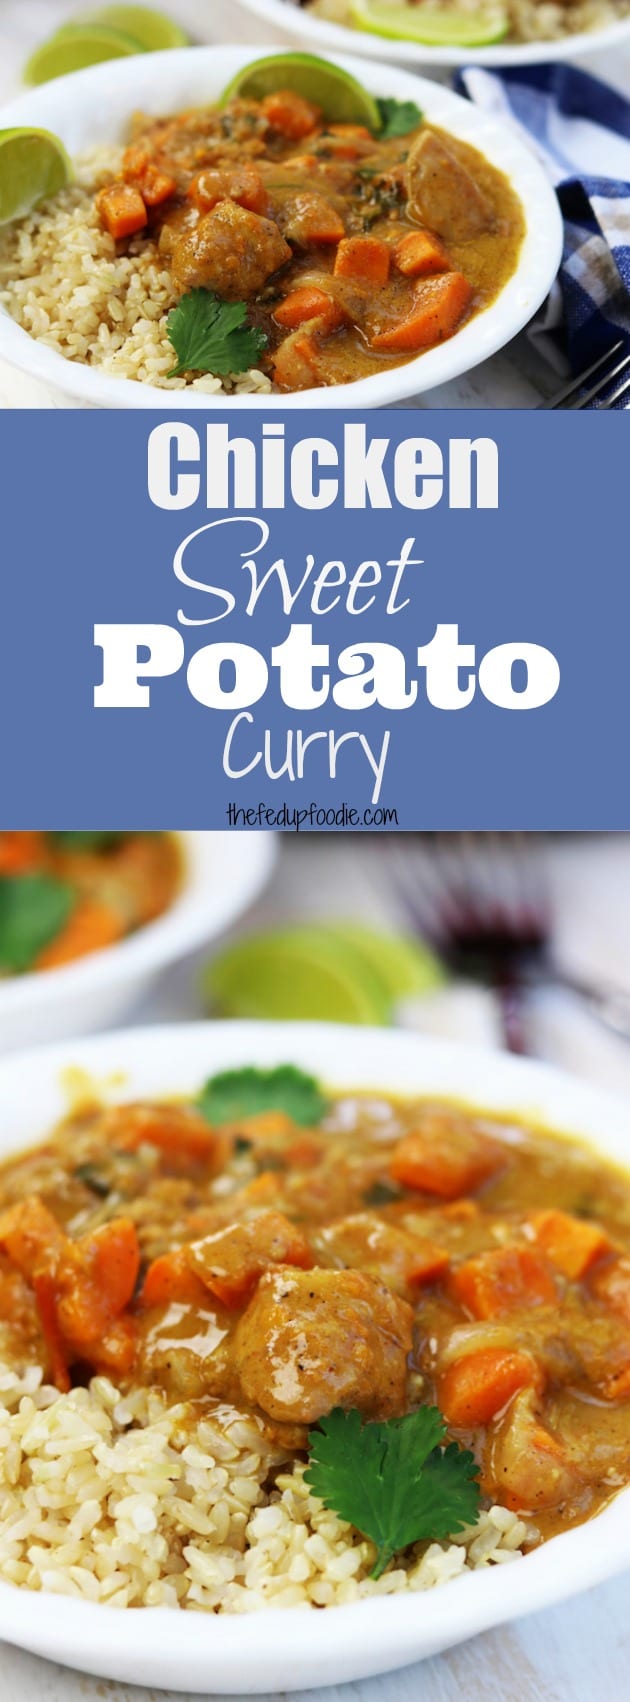 How To Make Super Healthy Chicken Sweet Potato Curry